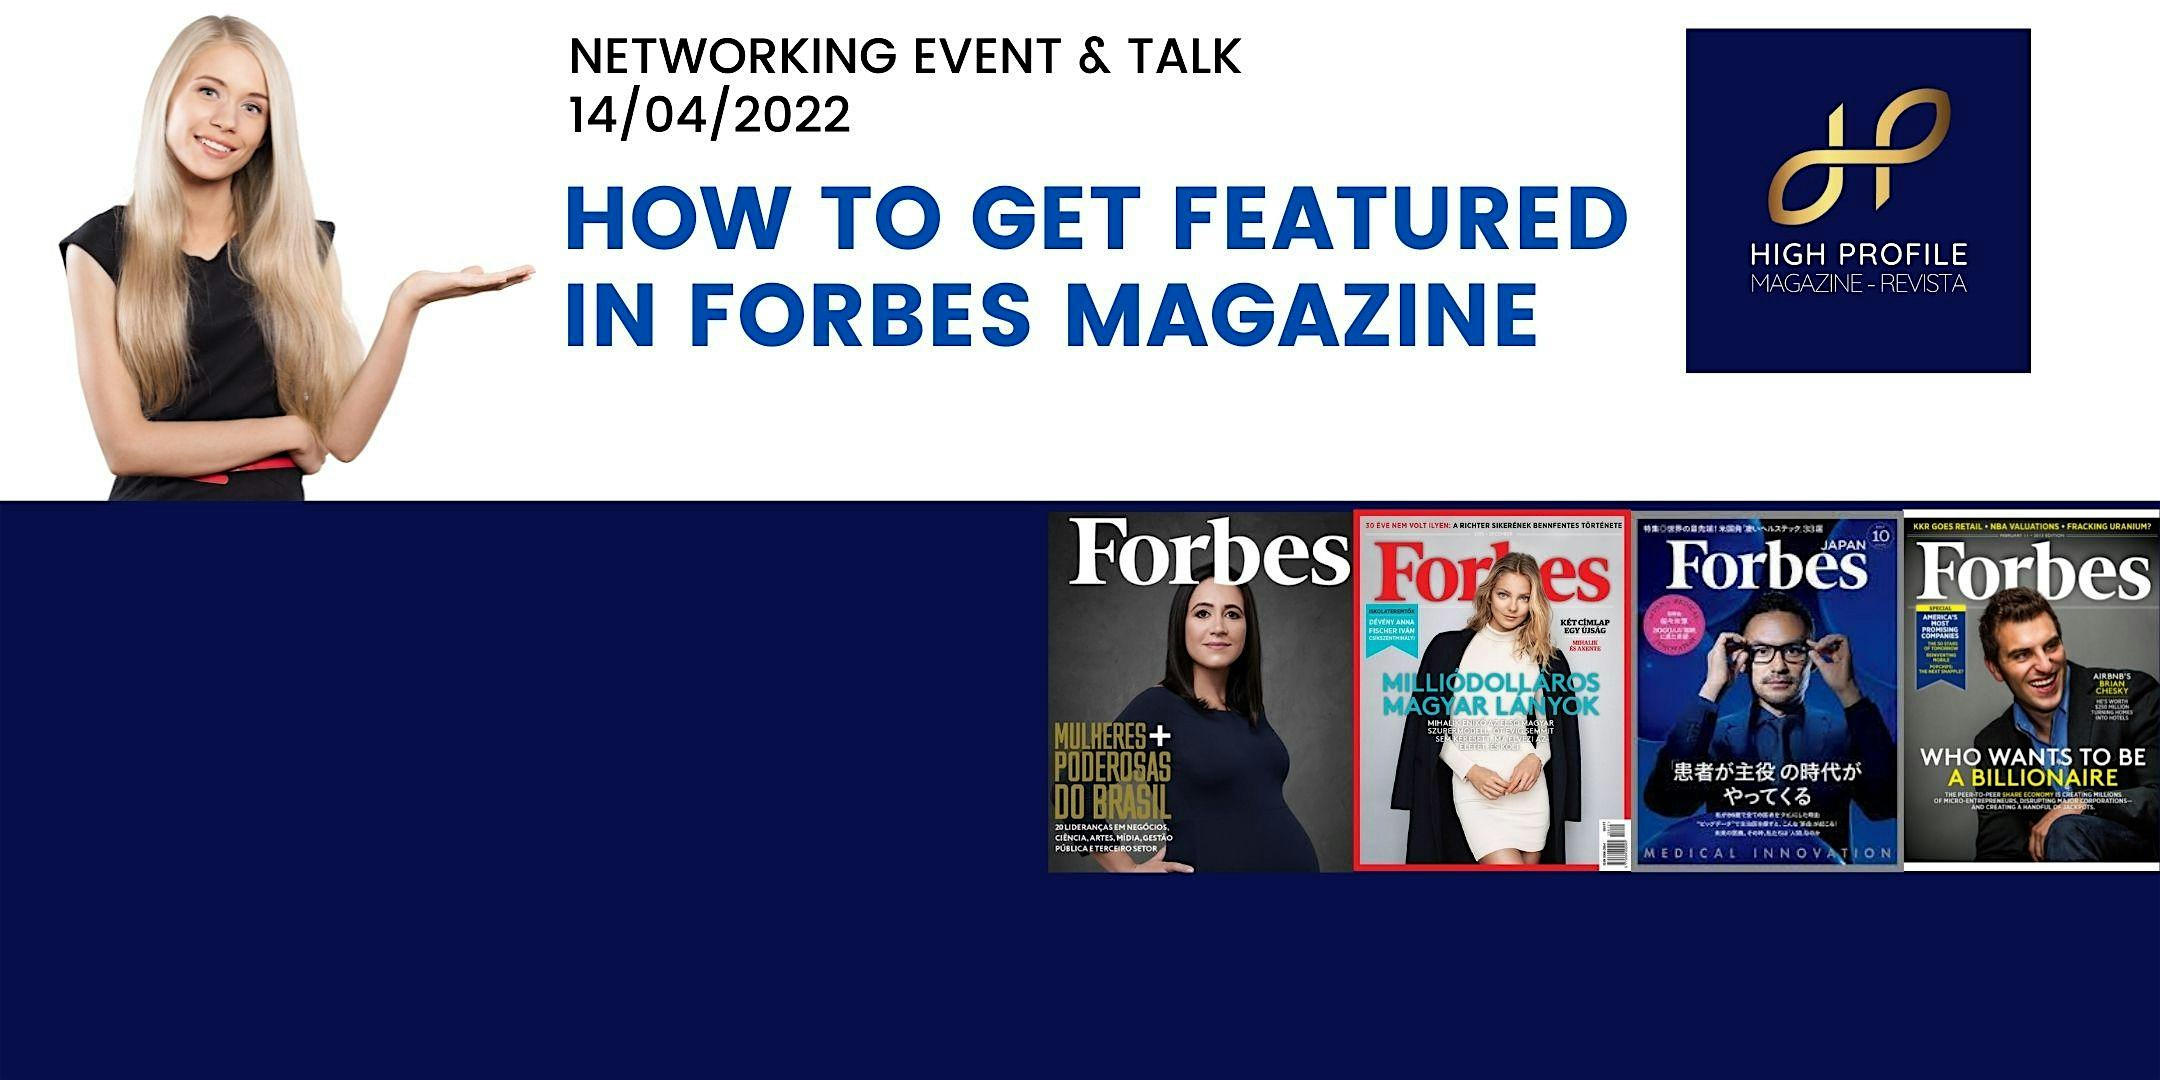 HOW TO GET FEATURED IN FORBES MAGAZINE